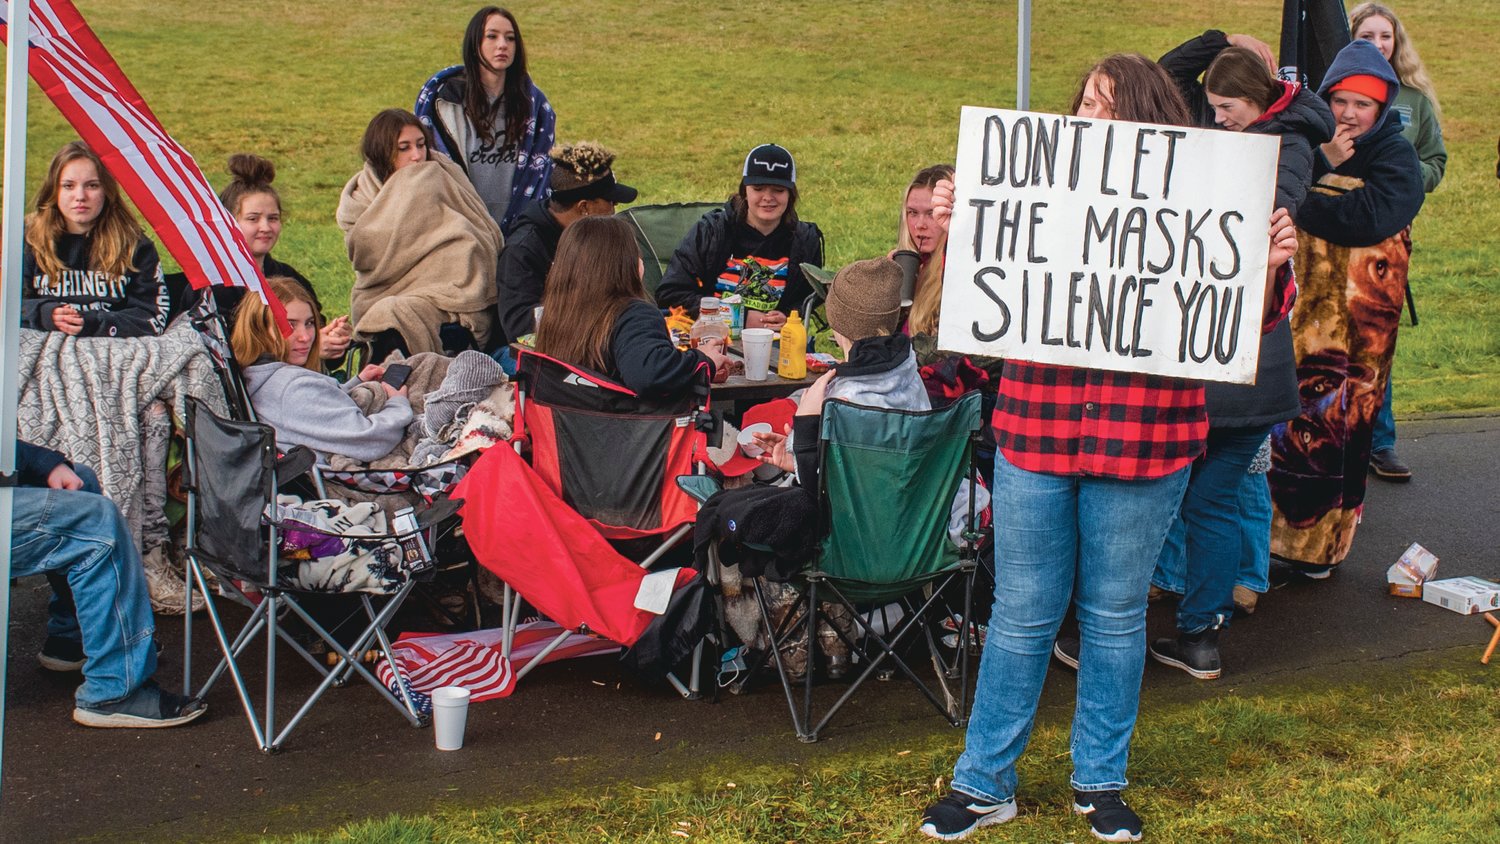 Pe Ell School District freshman Payon Endsley holds up a sign as students gather around food and a fire during a demonstration on Wednesday.